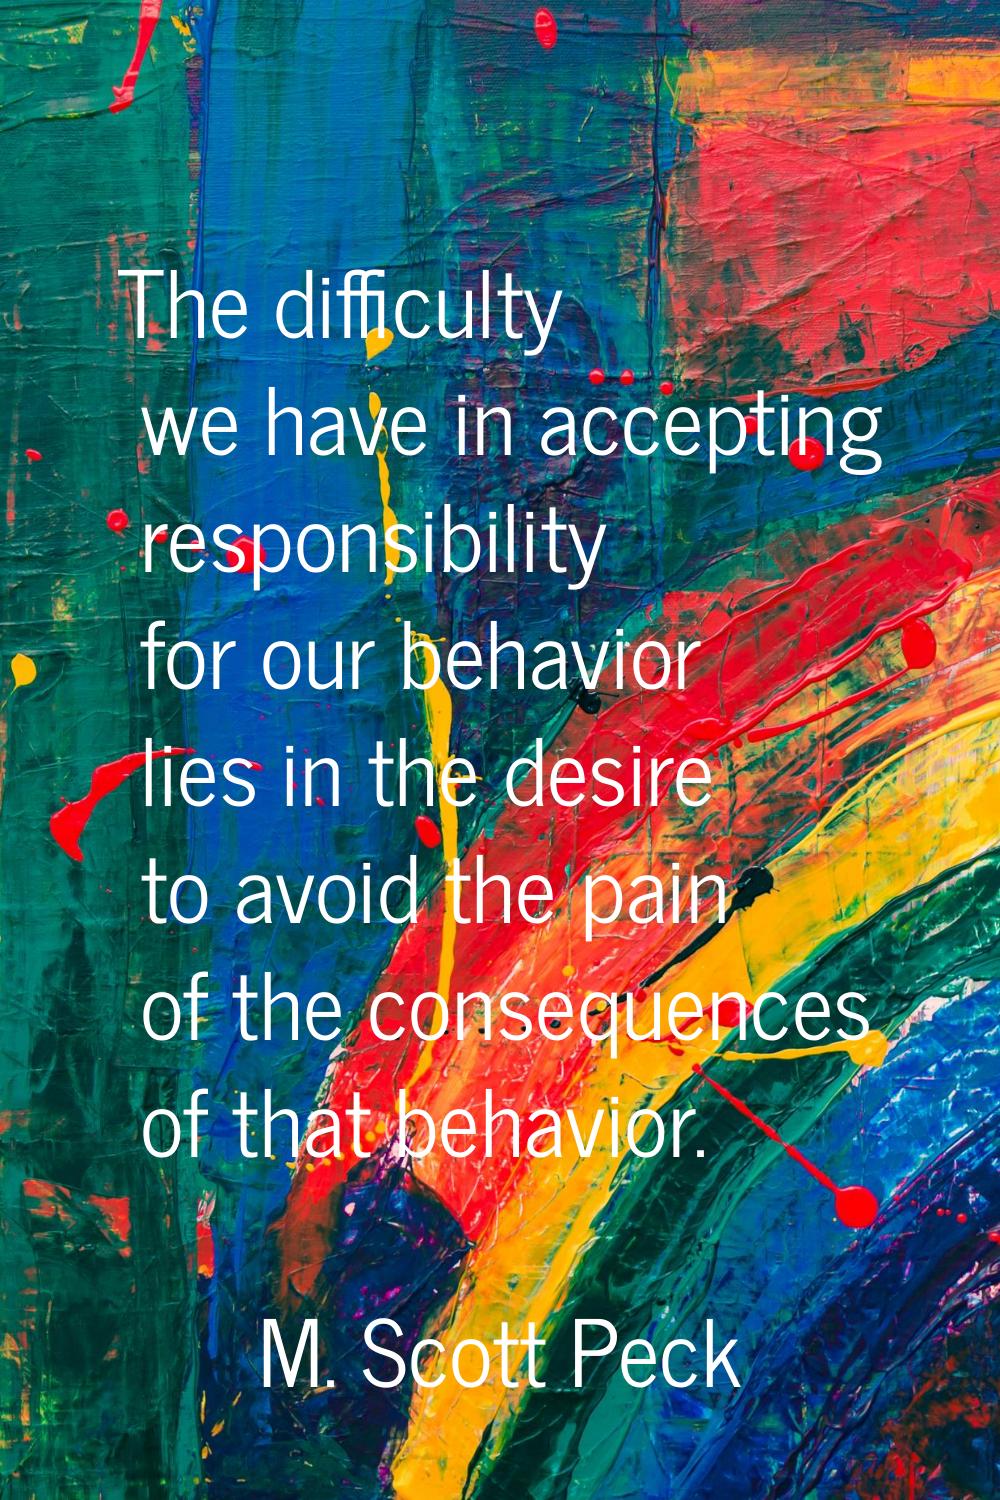 The difficulty we have in accepting responsibility for our behavior lies in the desire to avoid the